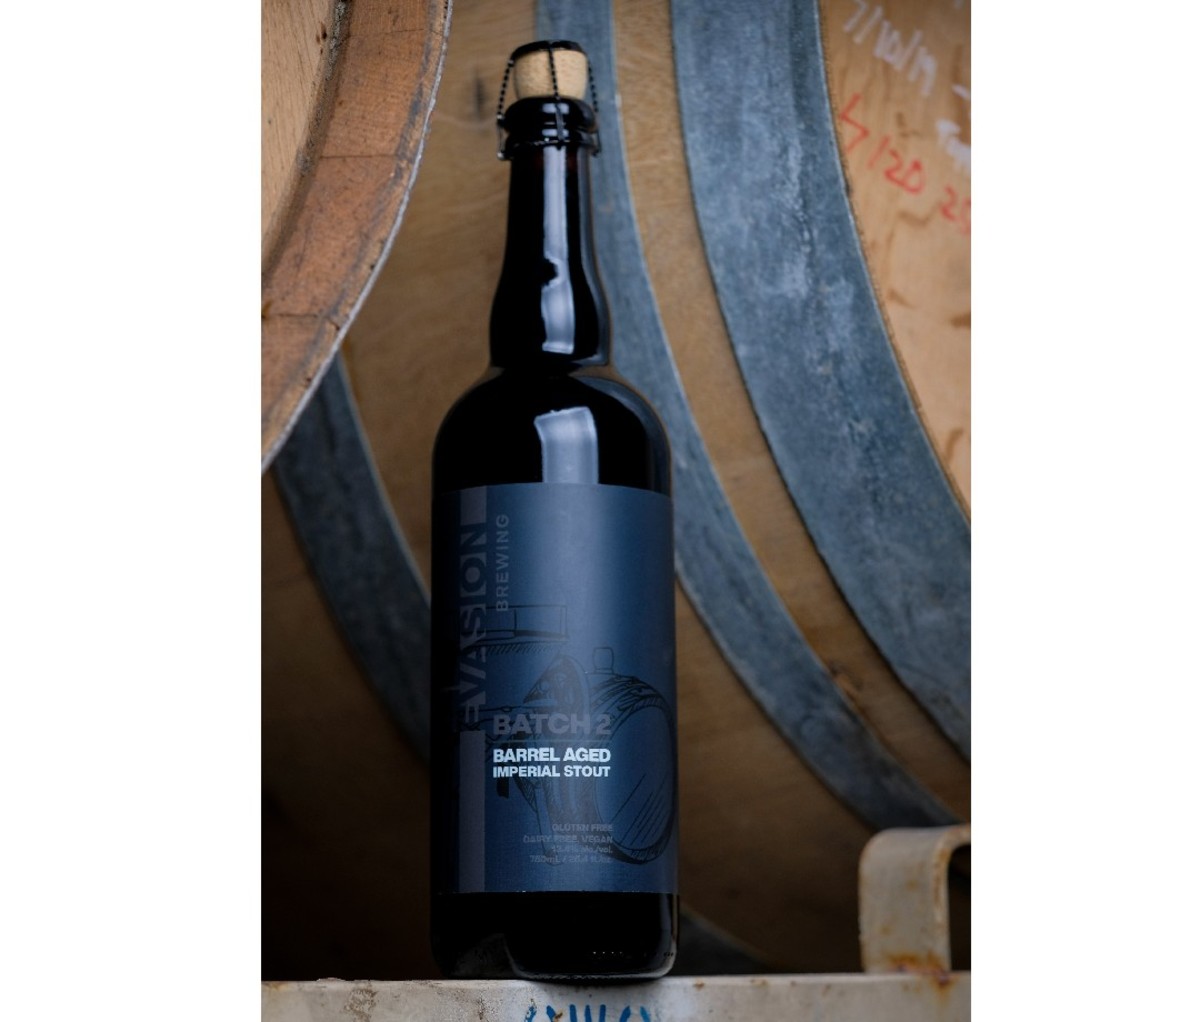 Tall black bottle of Evasion Brewing Batch 2 Barrel Aged Imperial Stout in front of a barrel wall background.